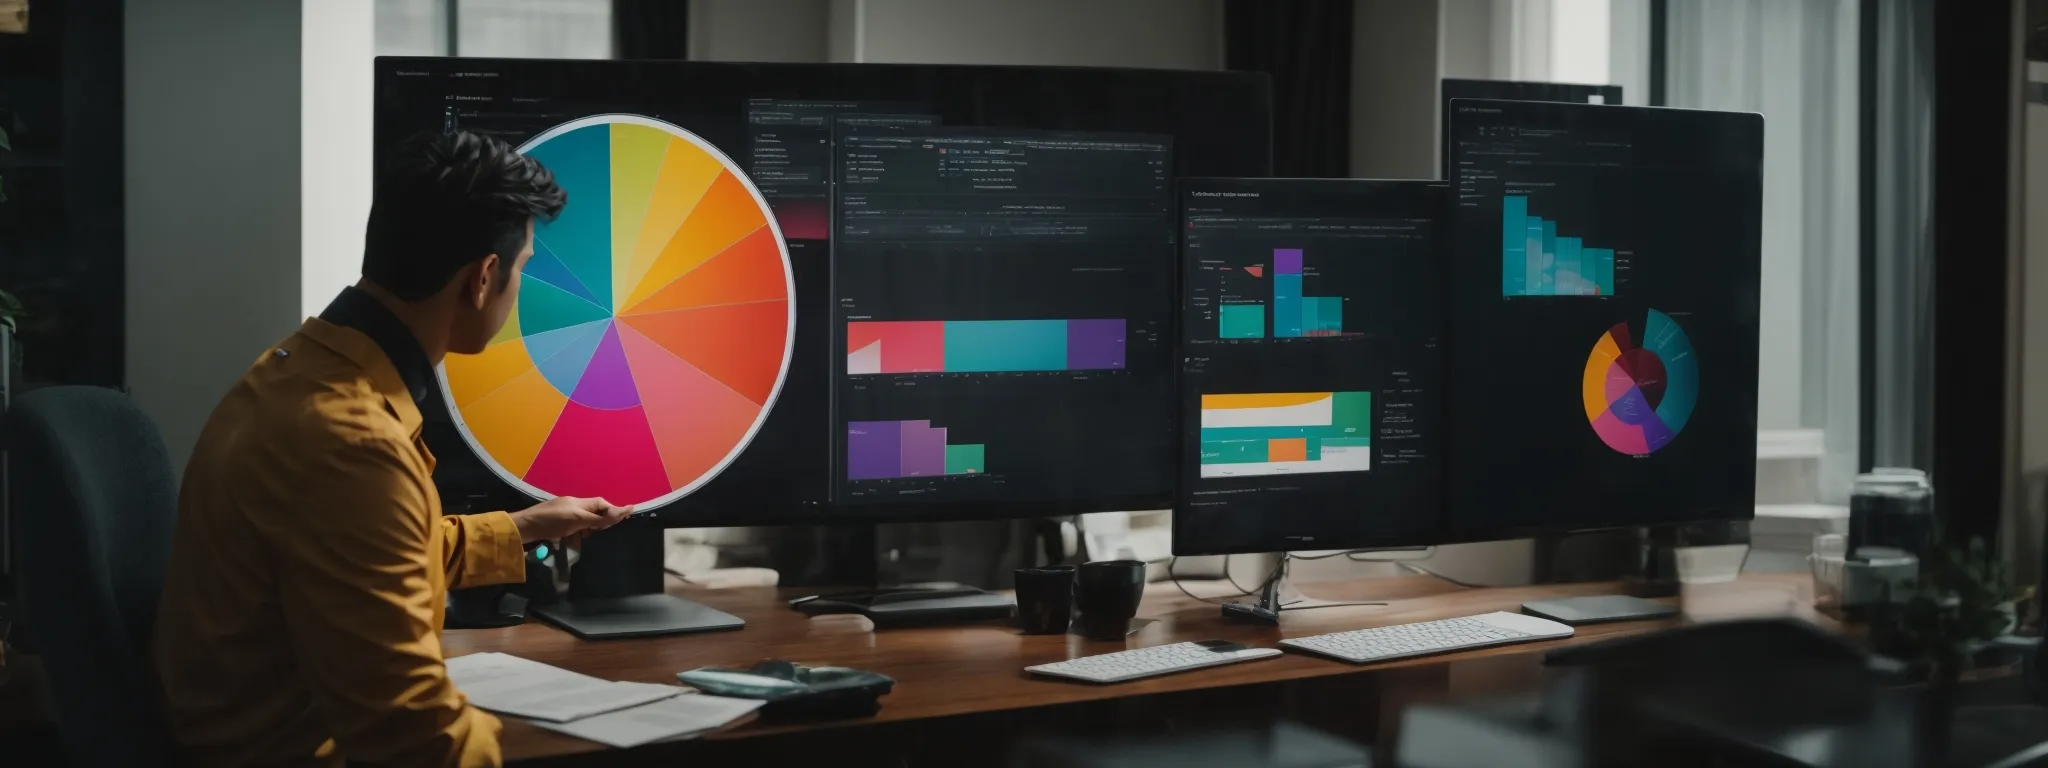 a marketer analyzing a colorful pie chart on a computer screen, reflecting seo strategy planning.